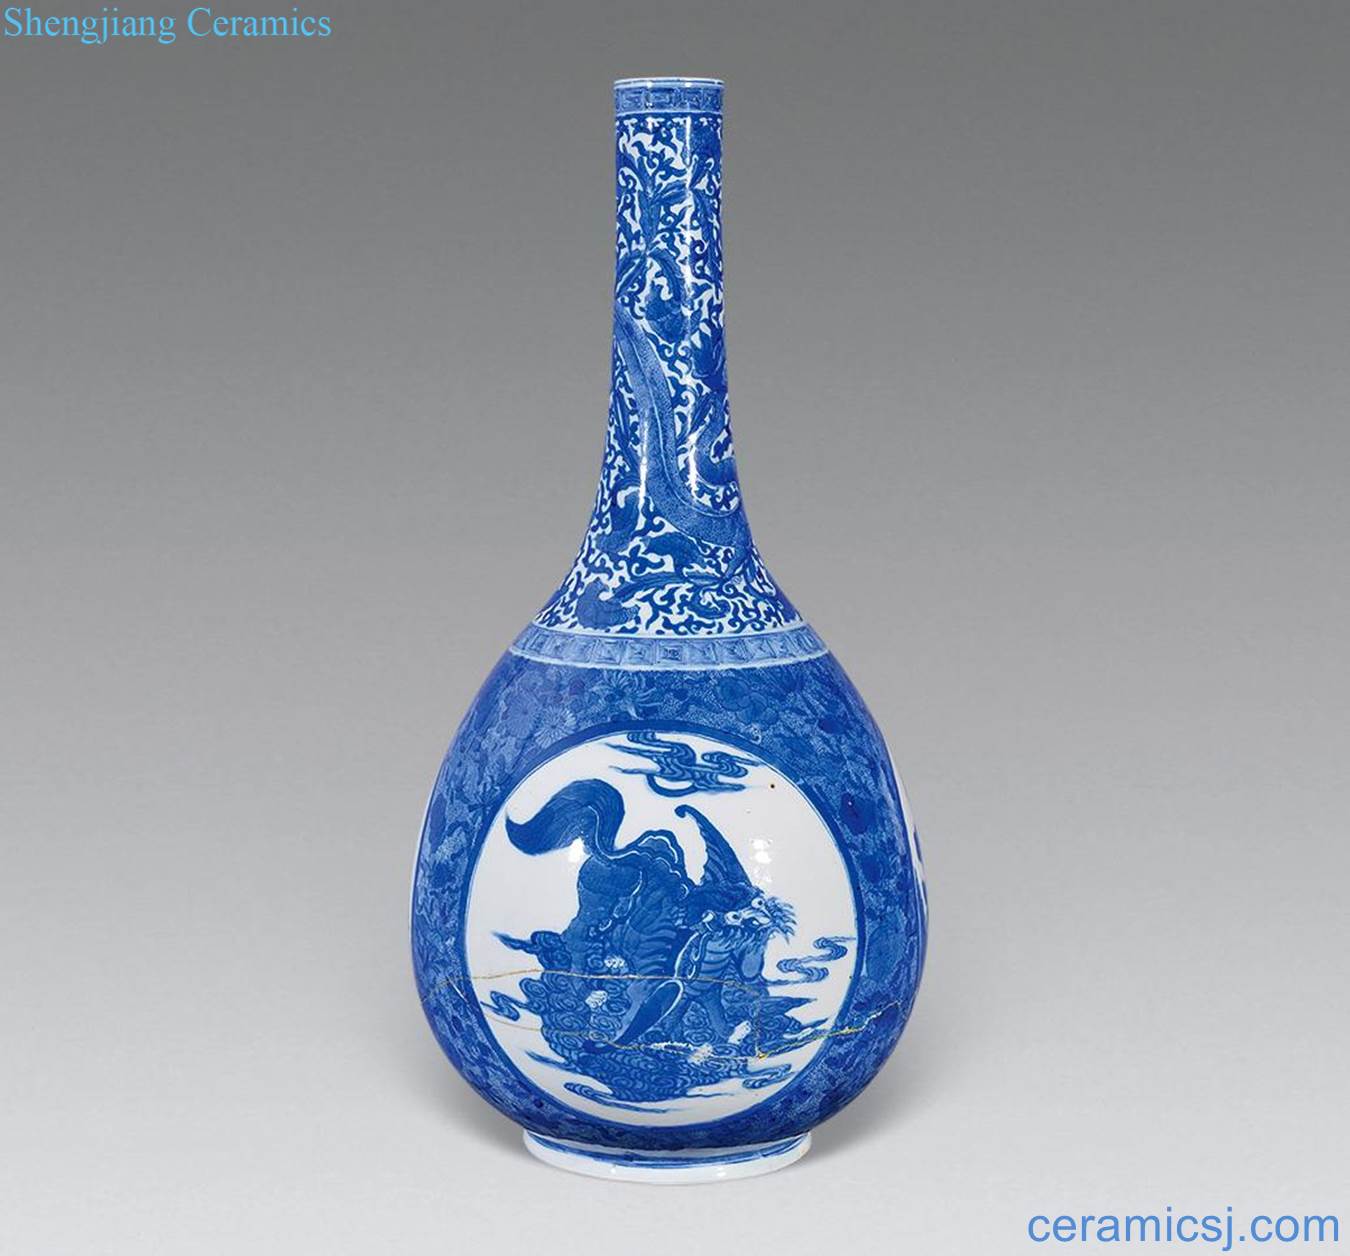 In late qing dynasty Blue and white medallion benevolent figure gall bladder